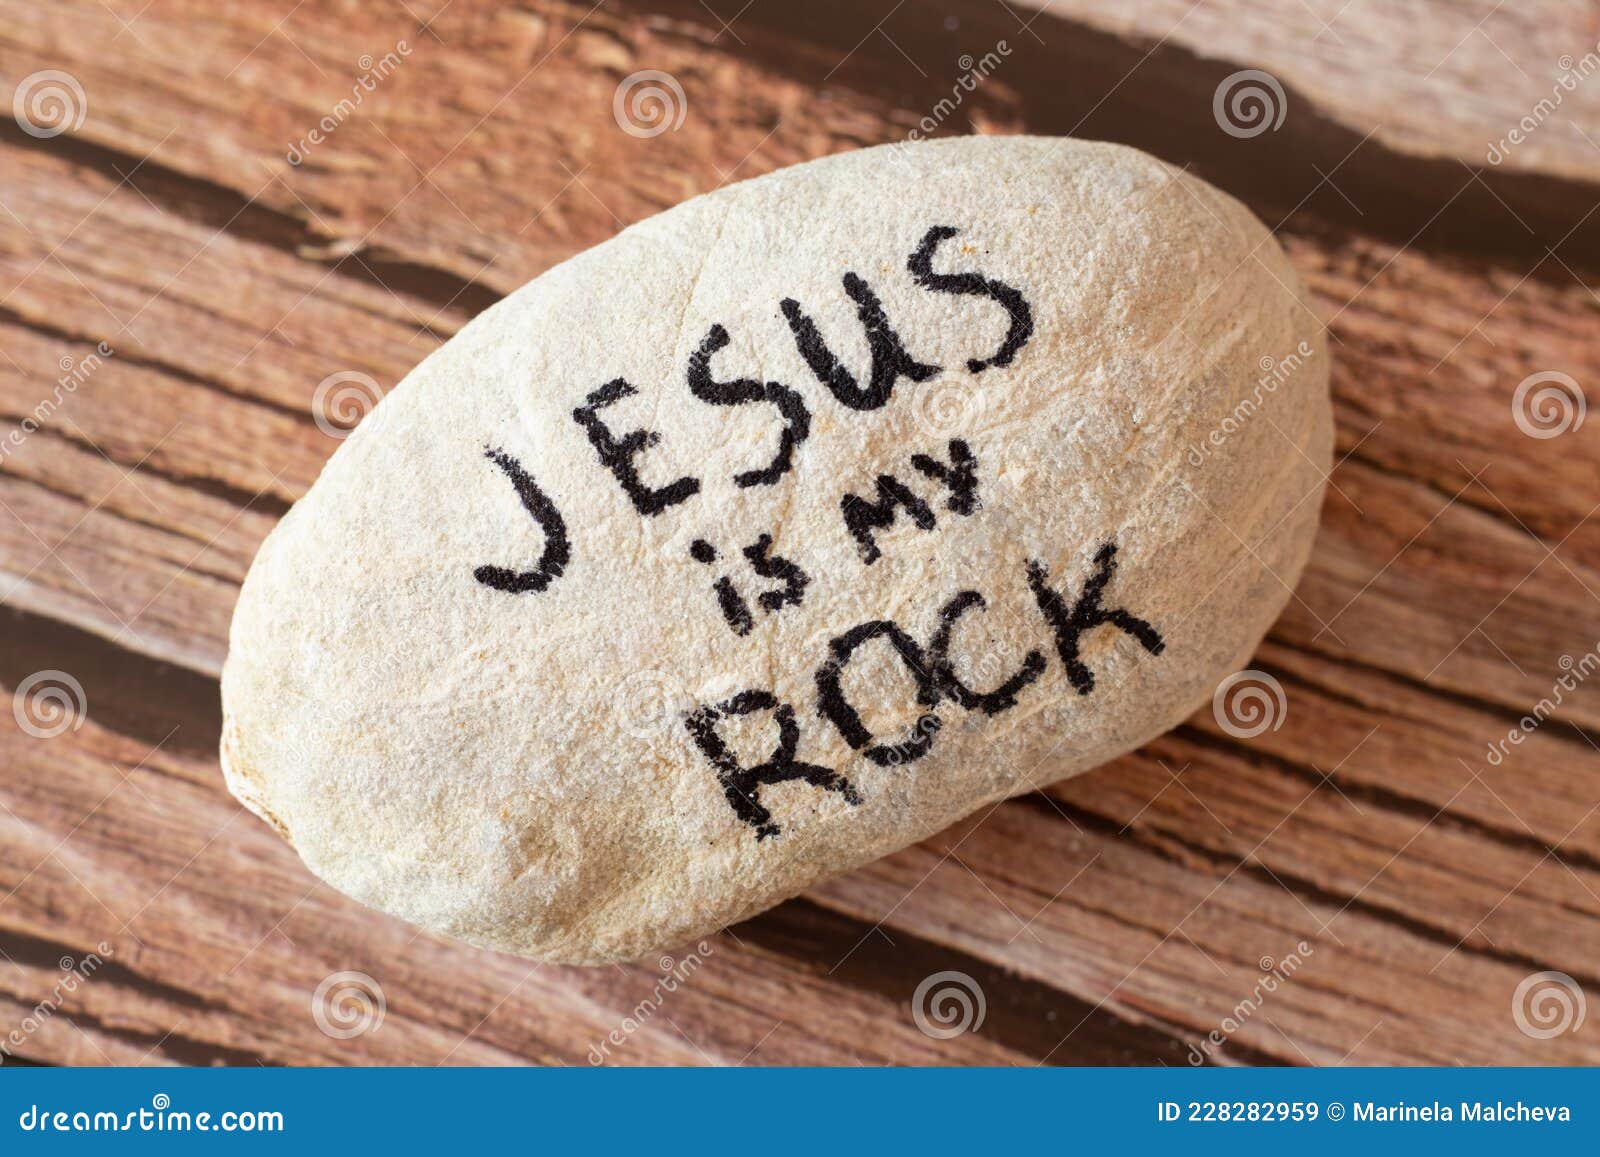 jesus christ is my god, rock, salvation, savior, and deliverer. a handwritten quote from holy bible on a stone.